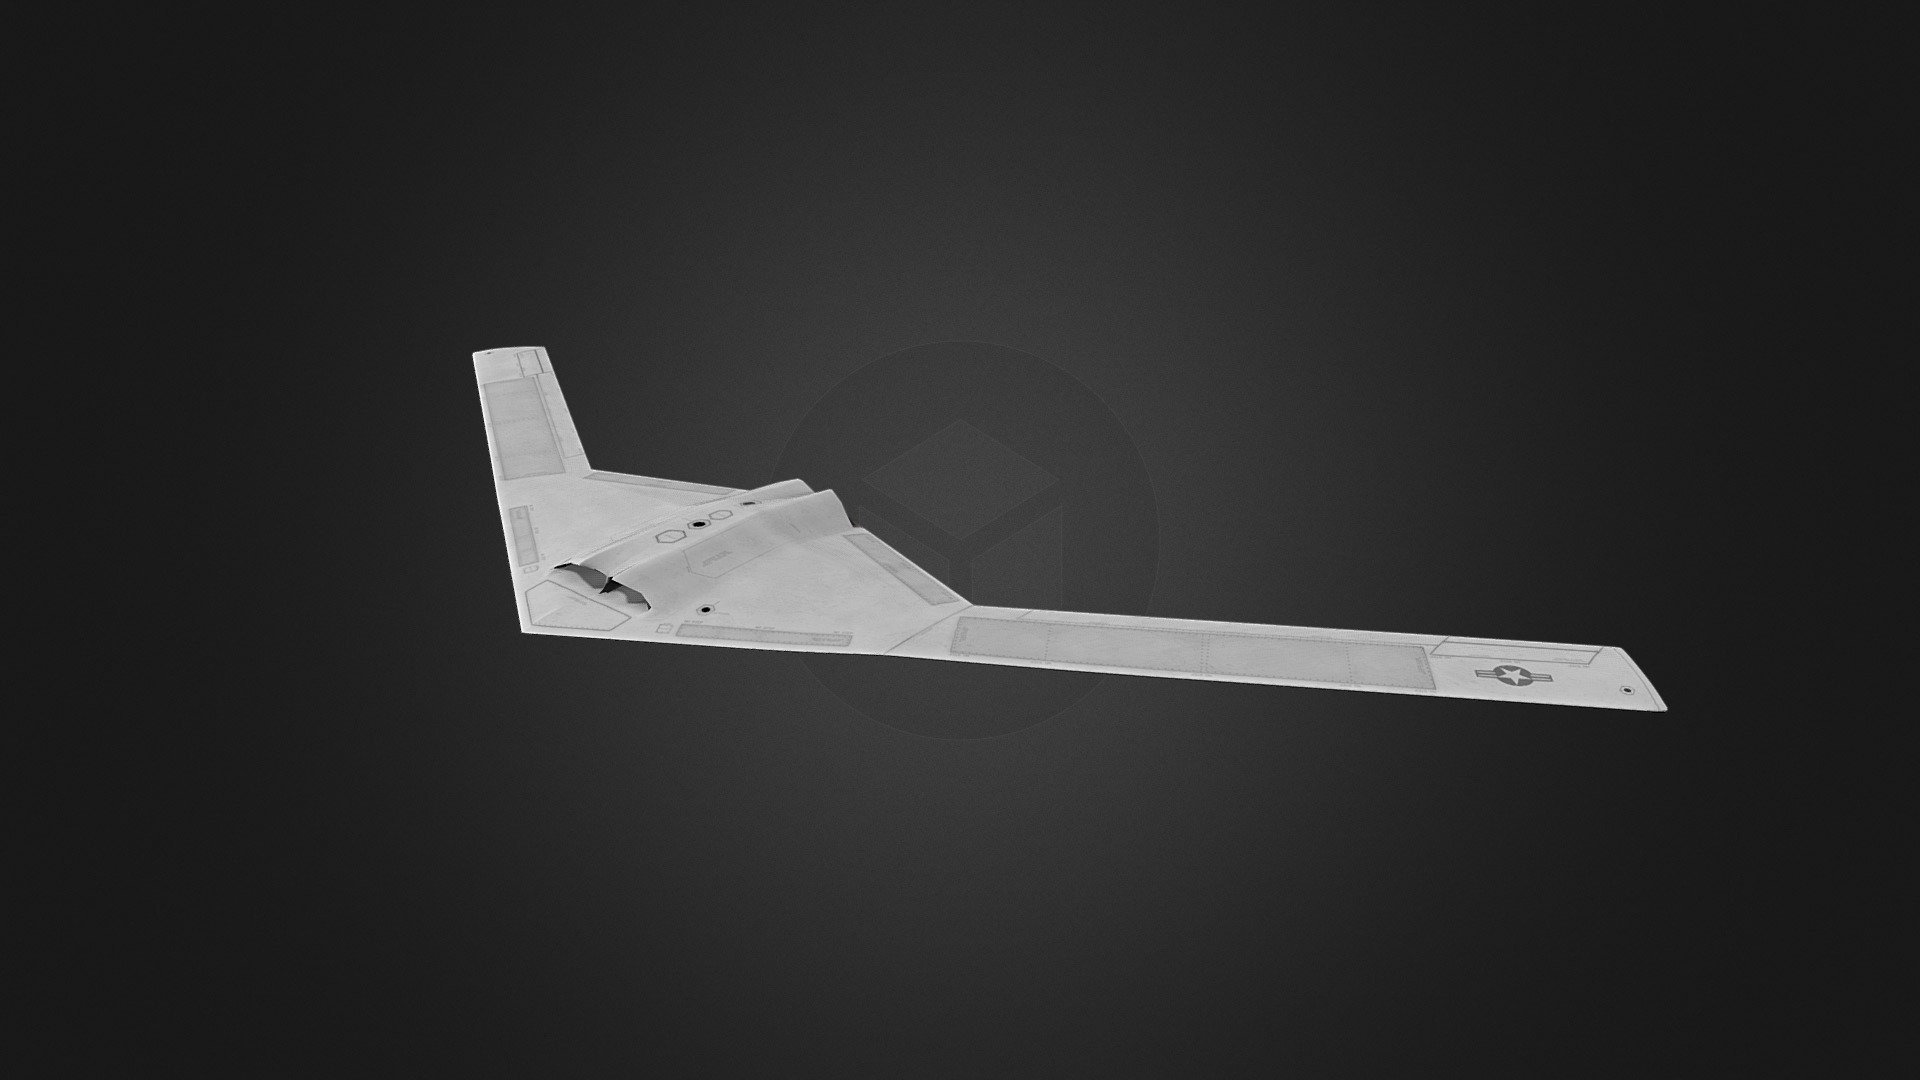 Based on available knowledge of the RQ-180 Unmanned Aerial System as of April, 2021 3d model